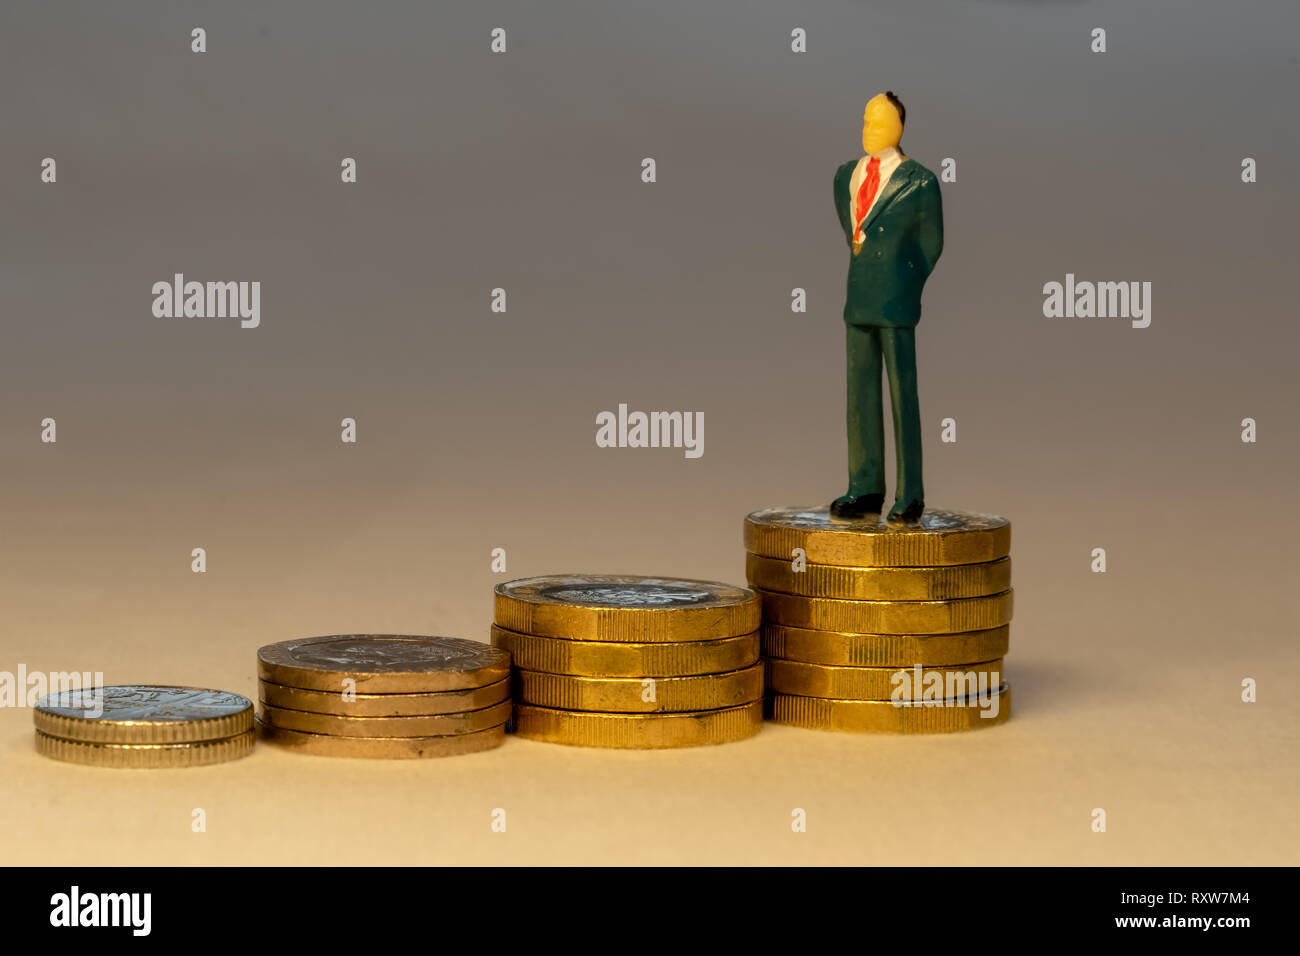 Rich successful businessman standing on top of increasing piles of gold coins. Business career concept. Stock Photo